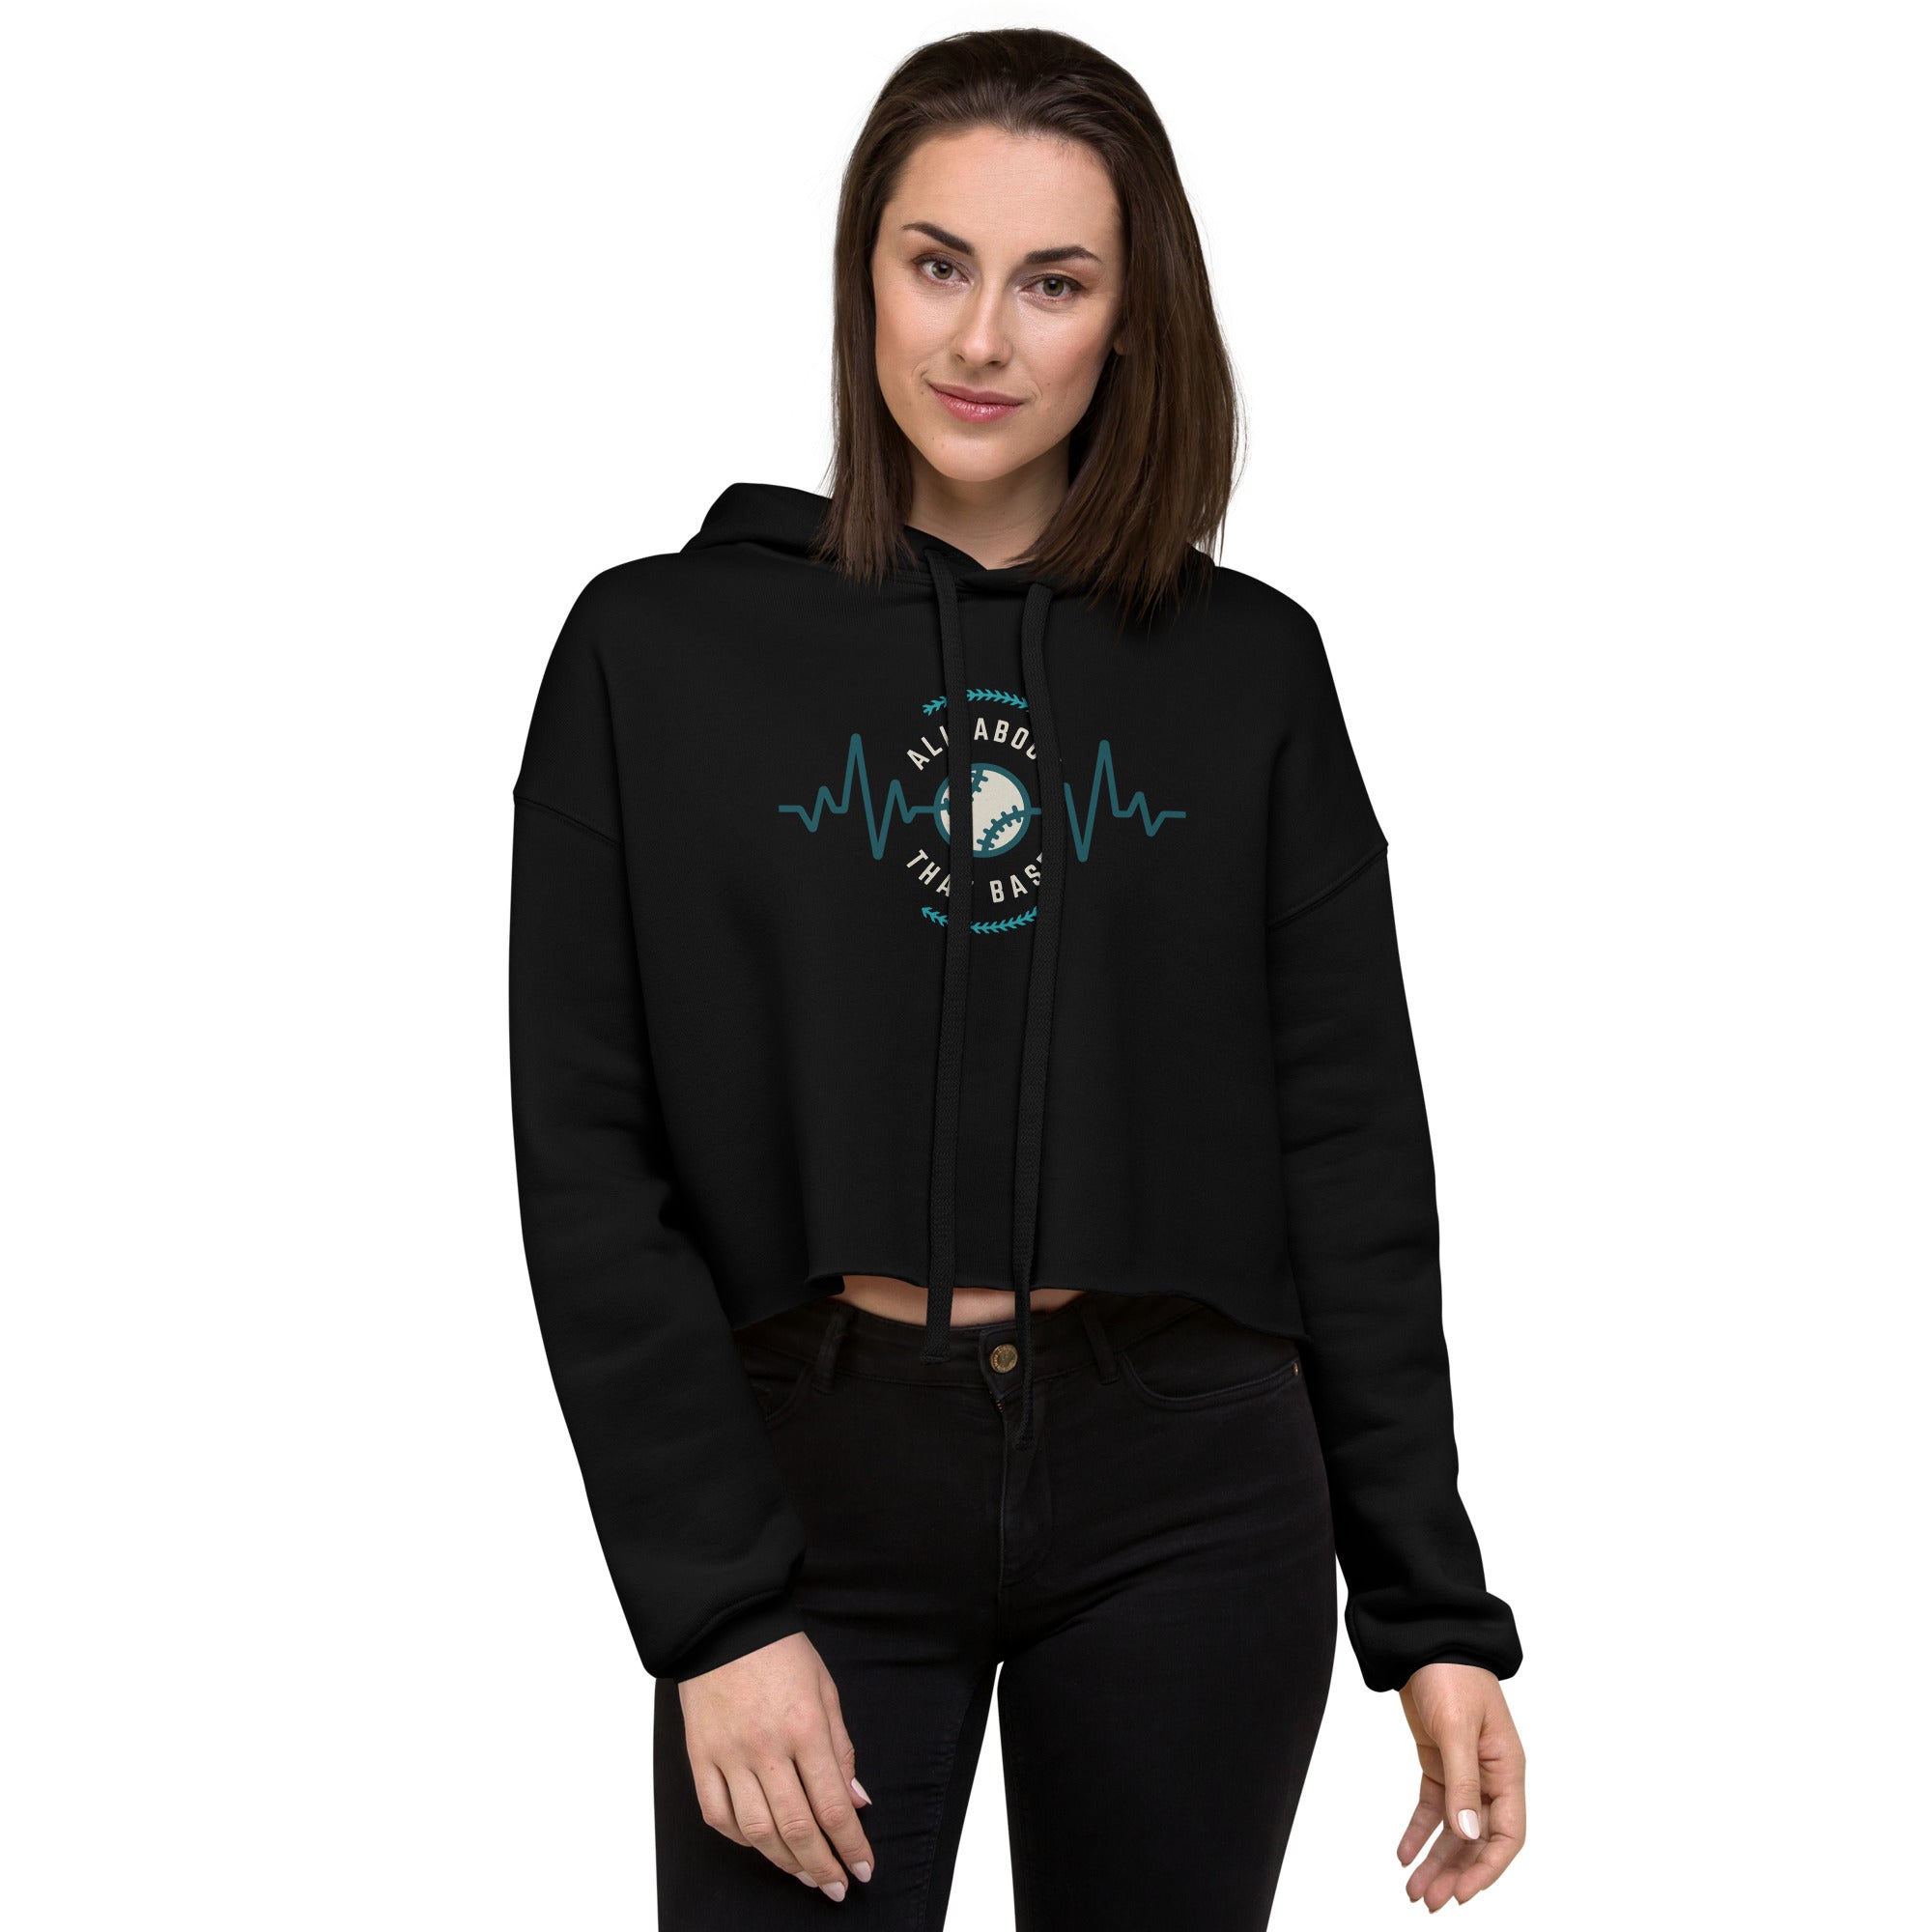 All About That Base Women's Crop Hoodie